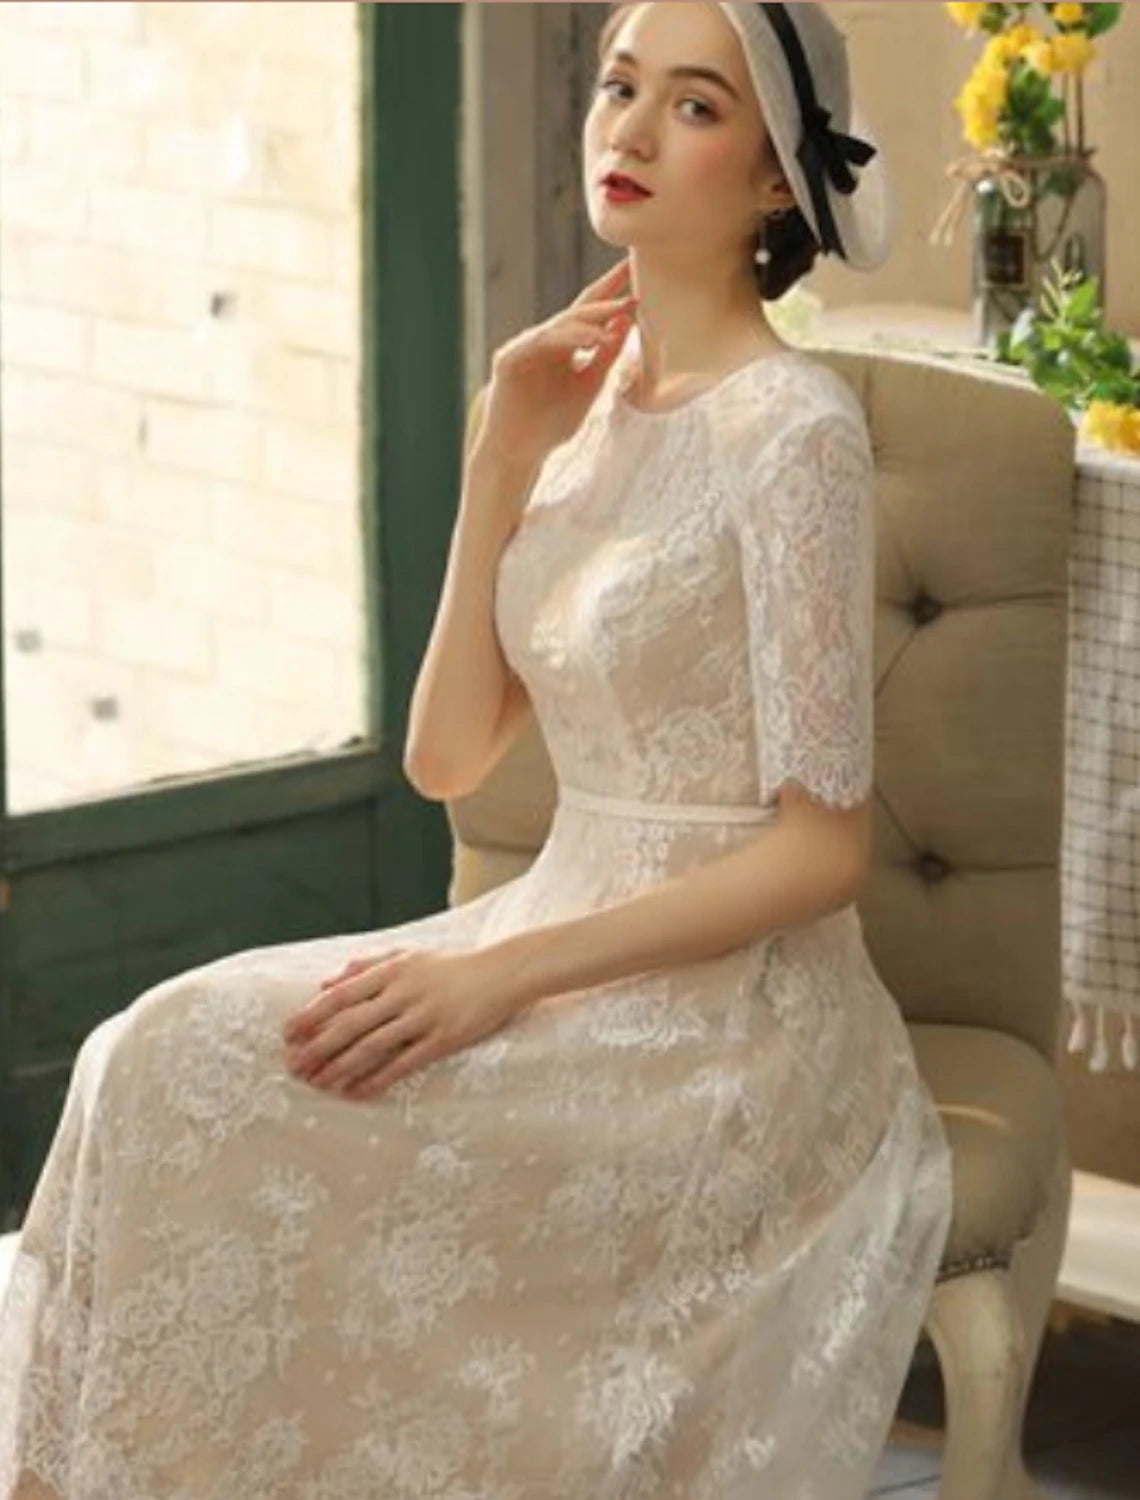 Reception Little White Dresses Wedding Dresses in Color Wedding Dresses A-Line Illusion Neck Half Sleeve Tea Length Lace Bridal Gowns With Sash / Ribbon Appliques